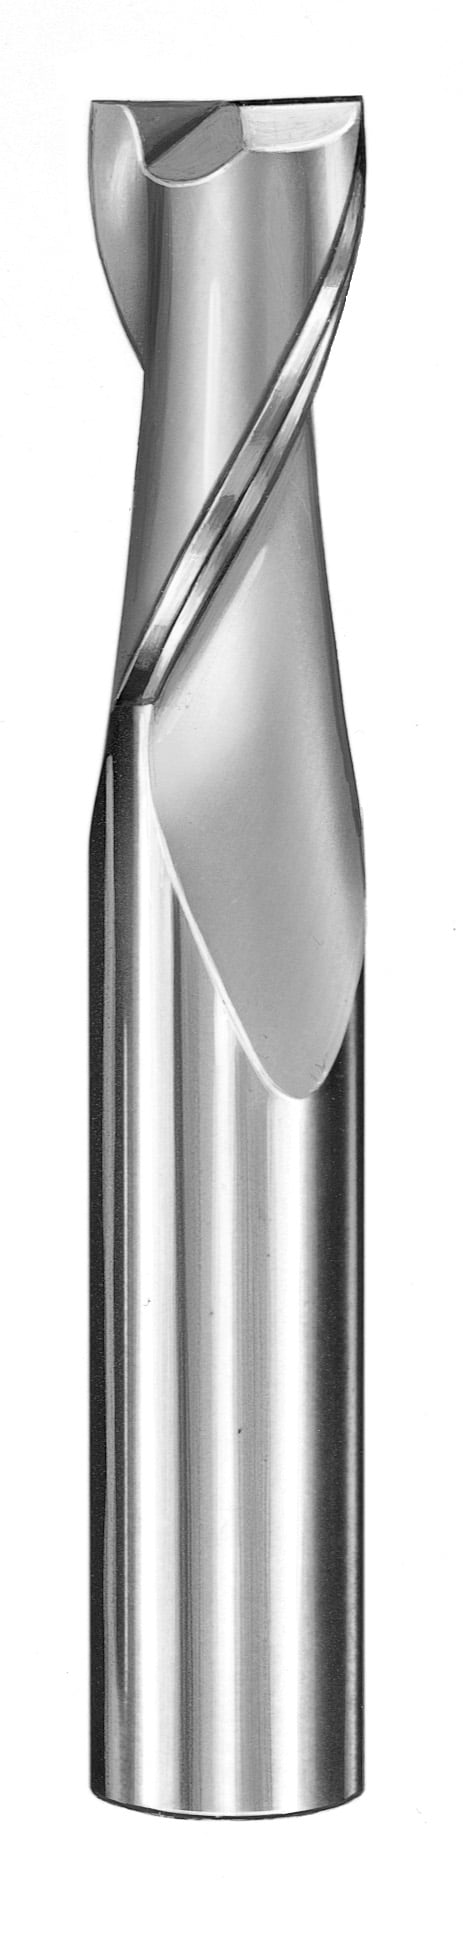 25/64" Dia, 2 Flute, Square End End Mill - 30349